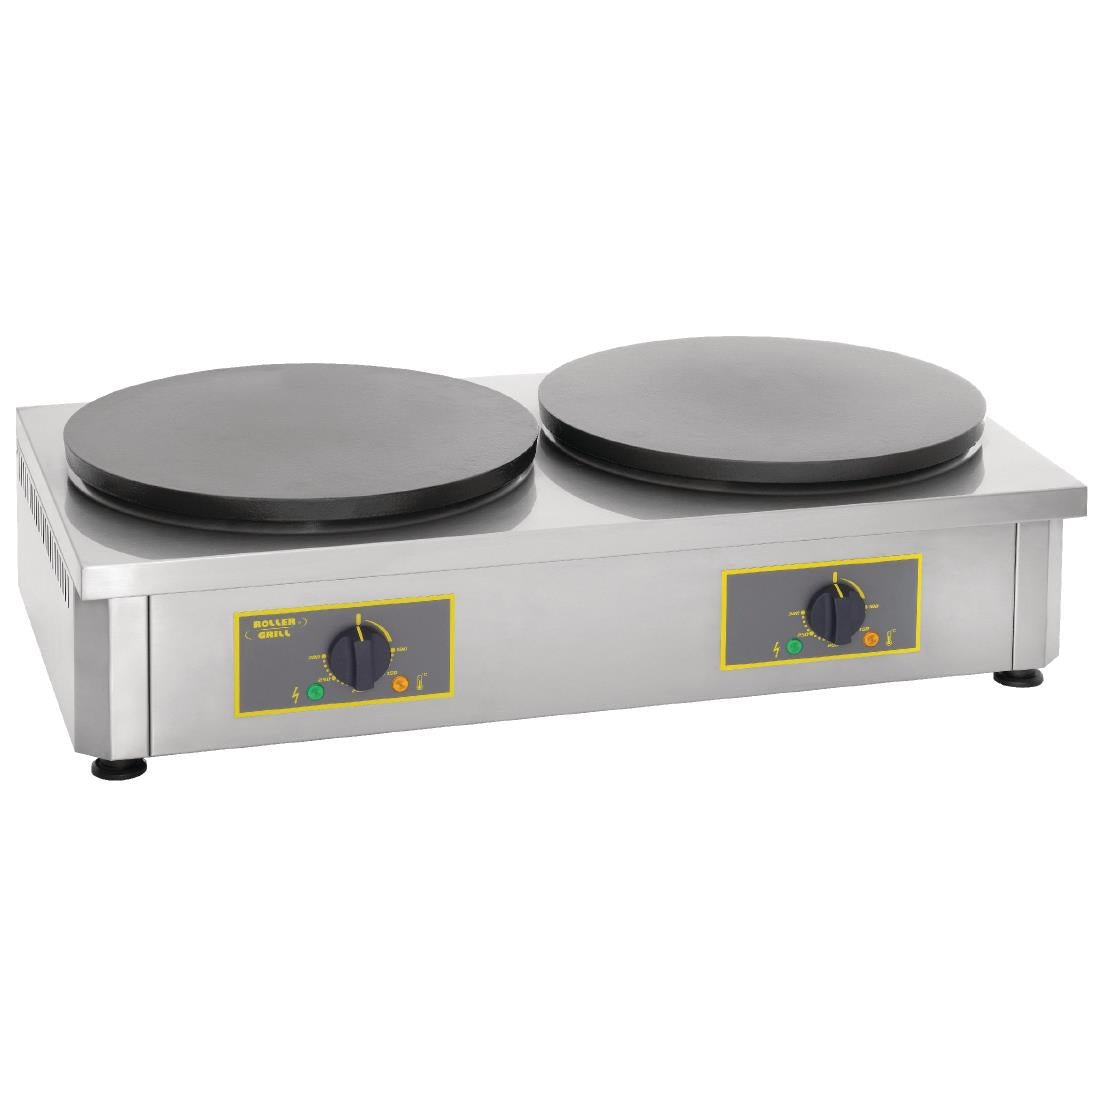 GD345 Roller Grill Double Electric Crepe Maker CDE400 JD Catering Equipment Solutions Ltd